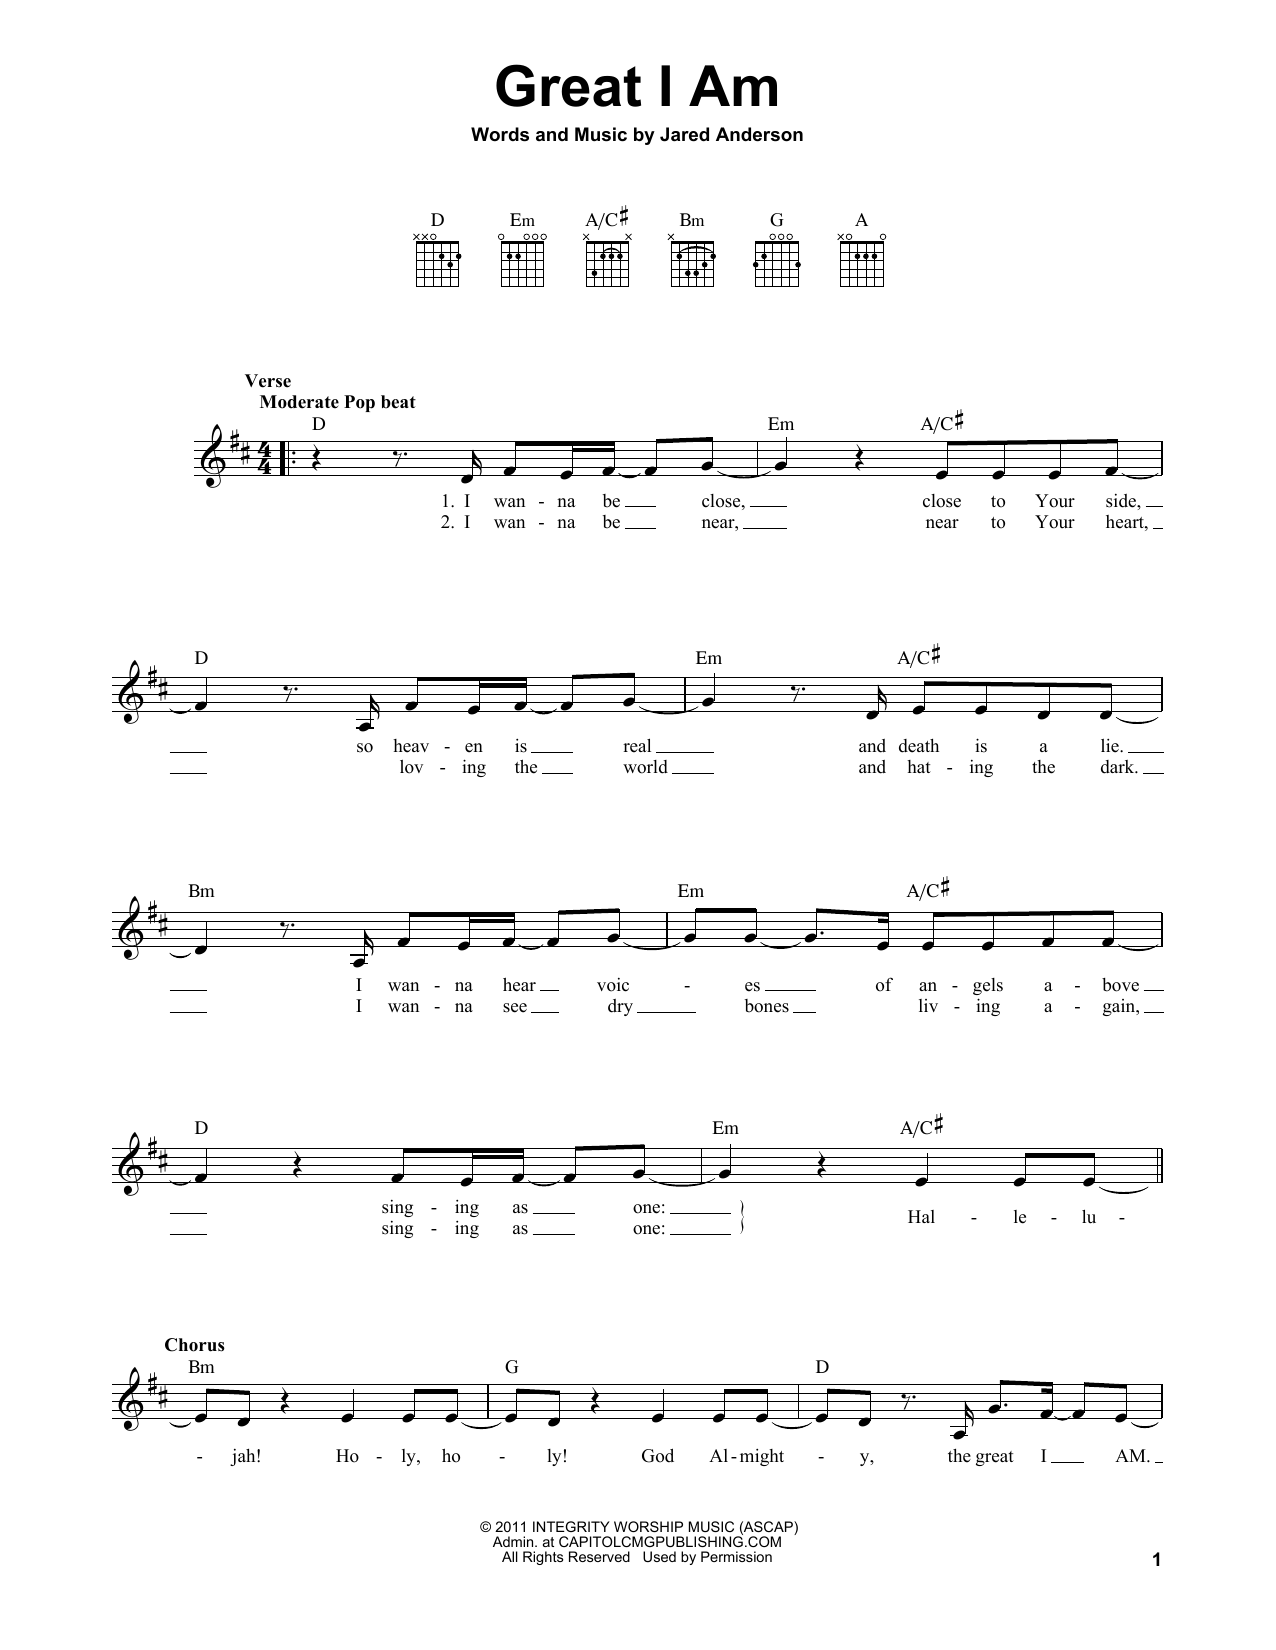 Download Jared Anderson Great I Am Sheet Music